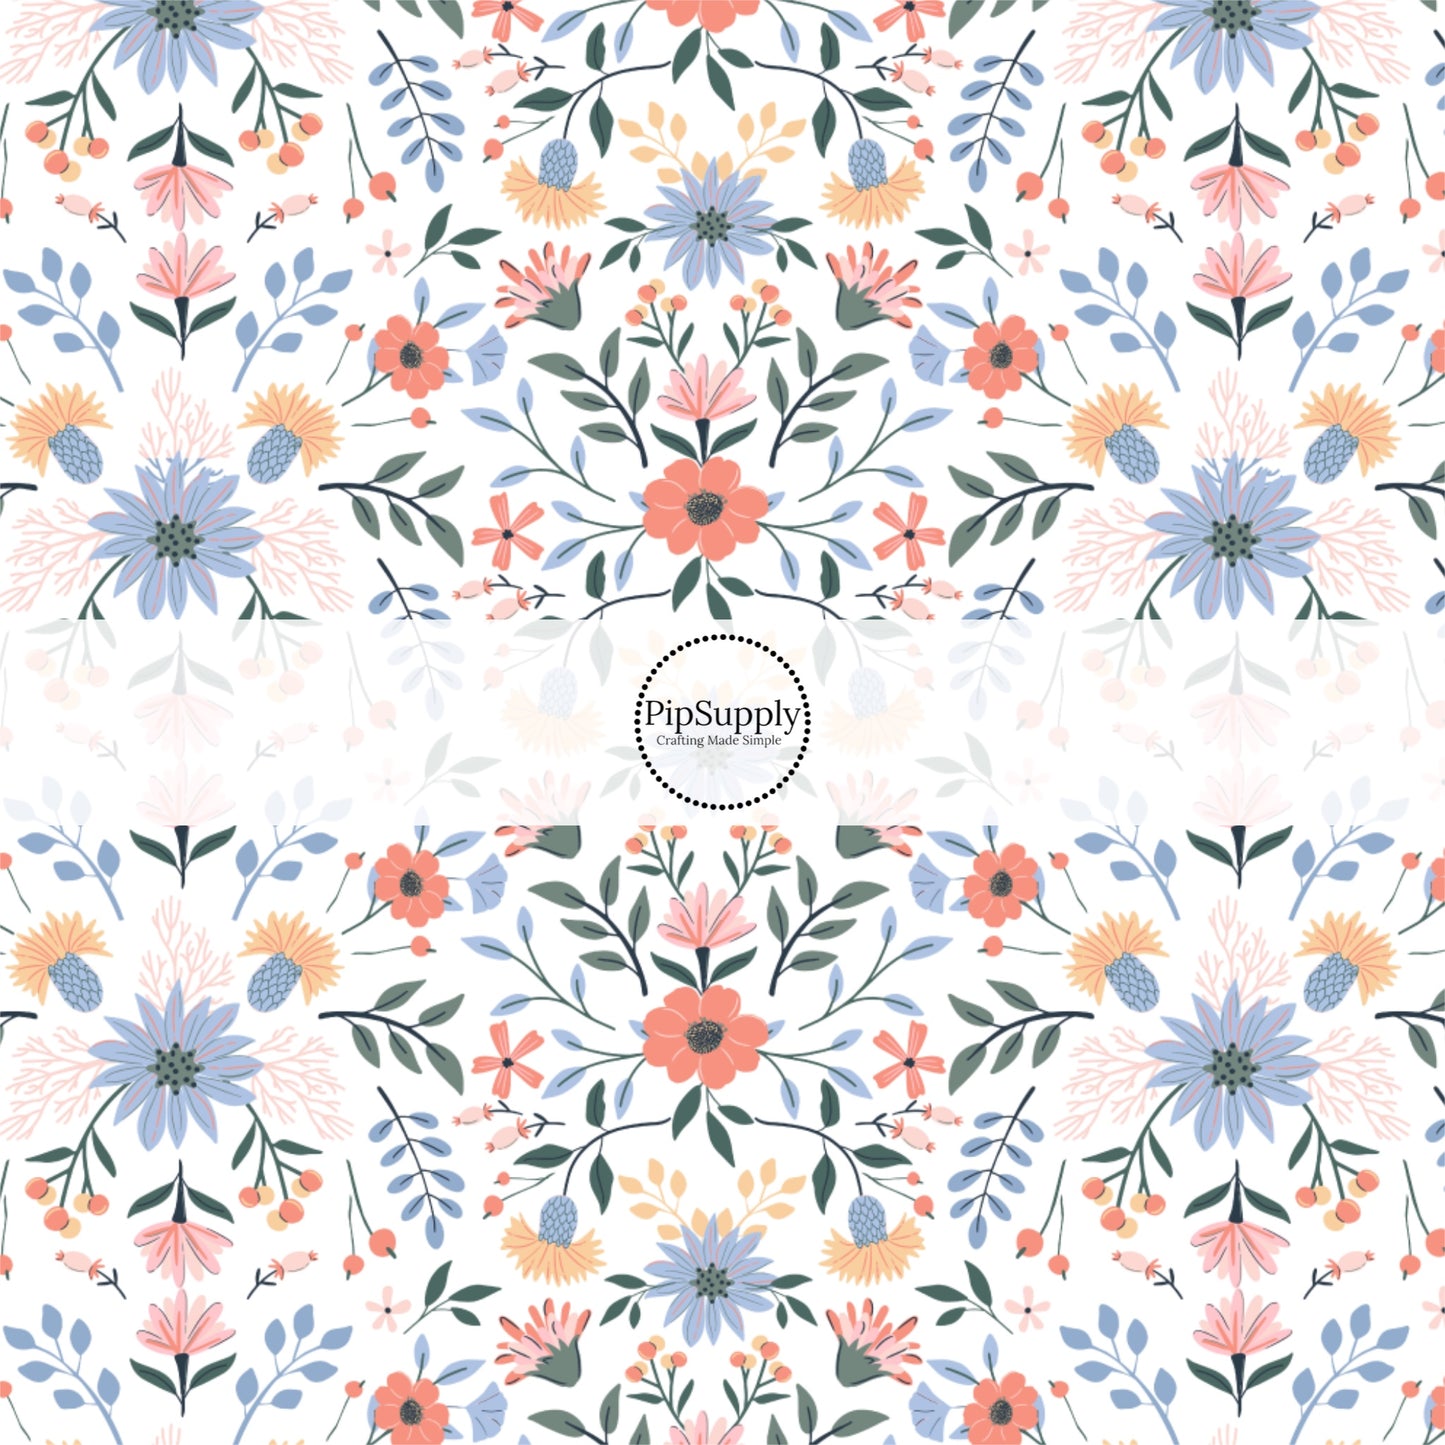 Bright Western Florals on Cream Fabric by the Yard.